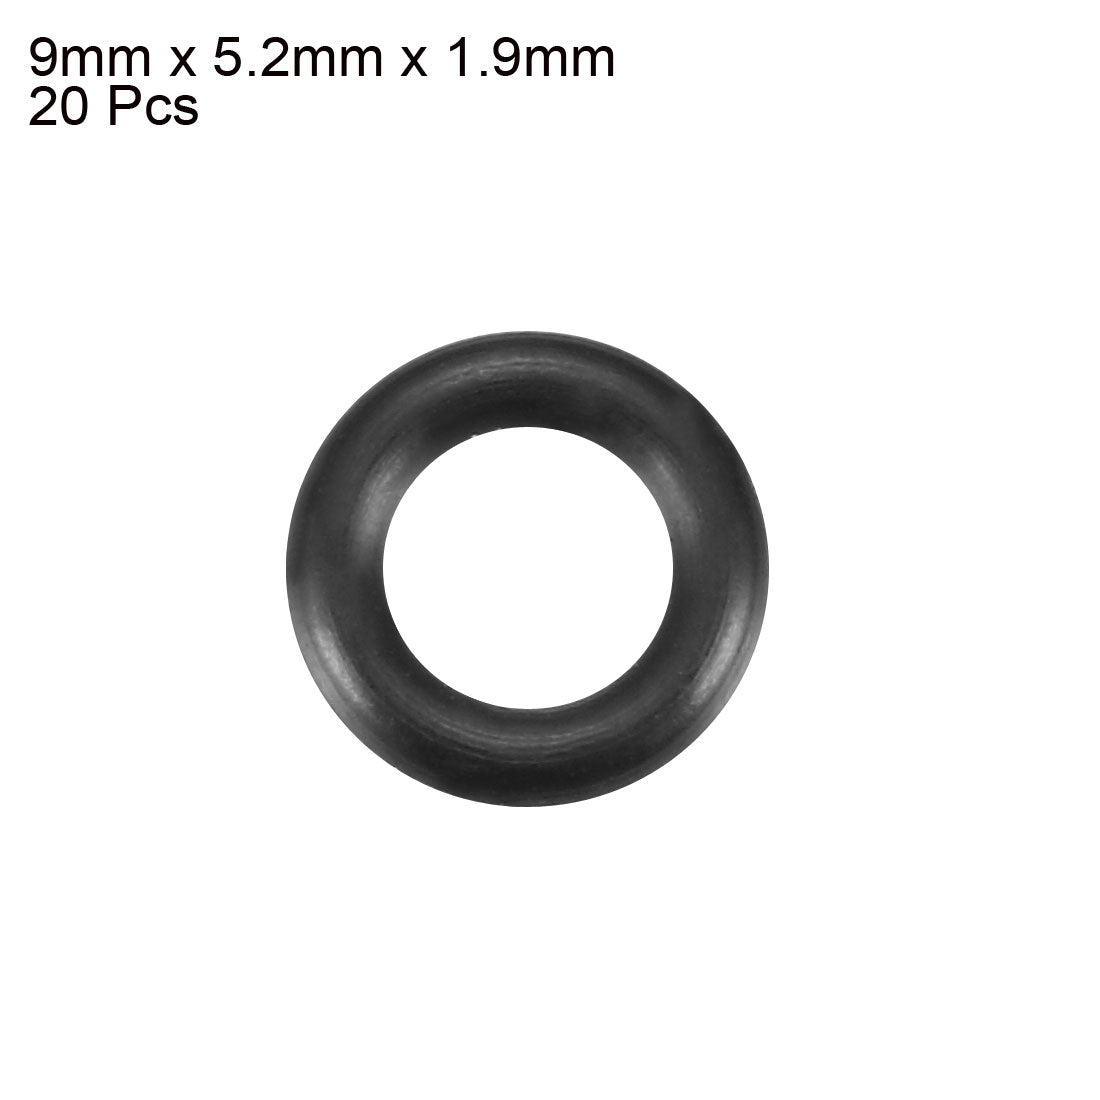 uxcell Uxcell 20Pcs 9mm x 1.9mm Rubber O-rings NBR Heat Resistant Sealing Ring Grommets Black